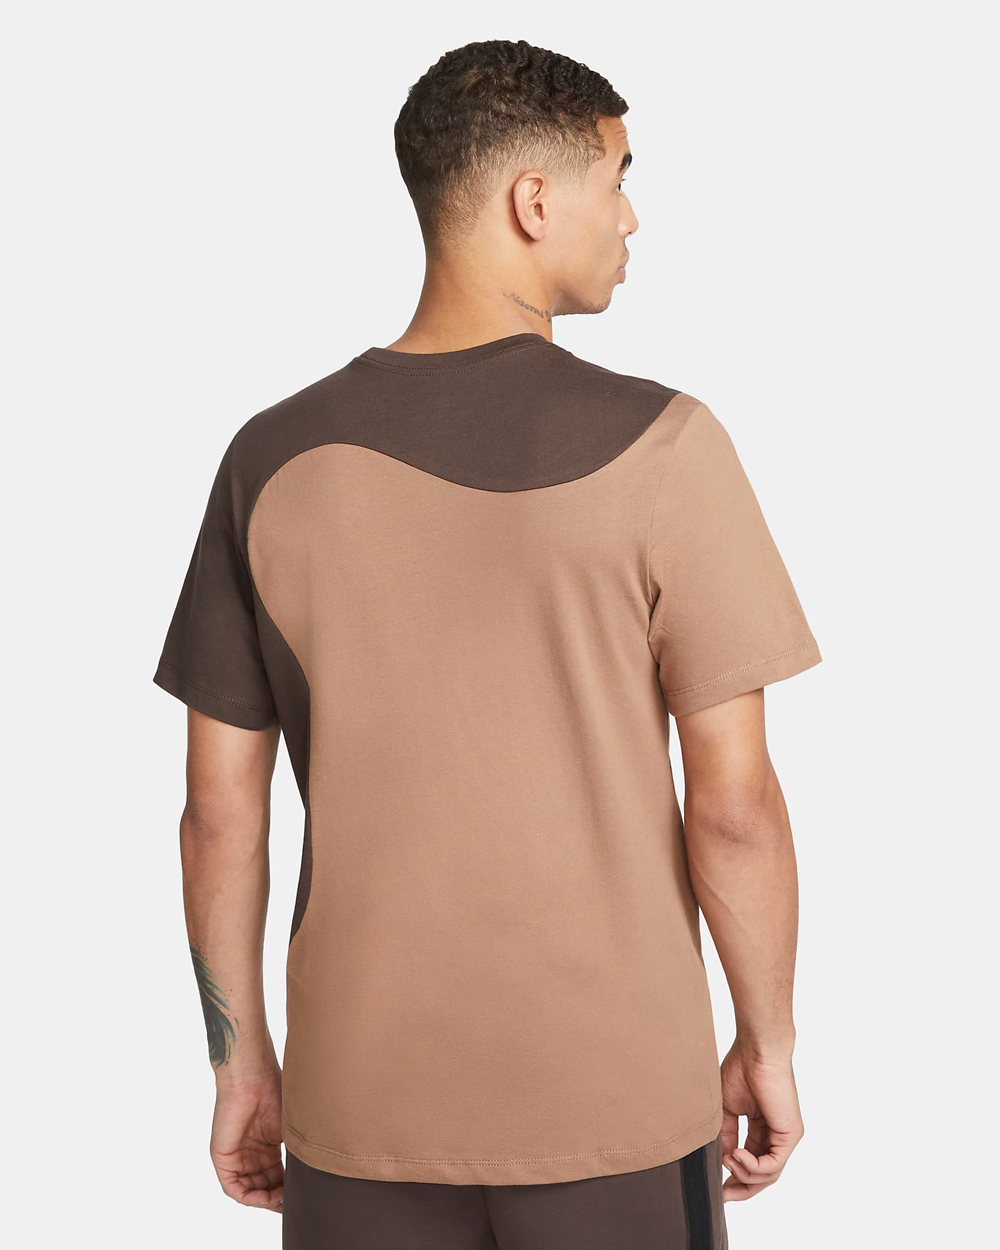 nike-sportswear-color-clash-t-shirt-archaeo-brown-baroque-brown-2